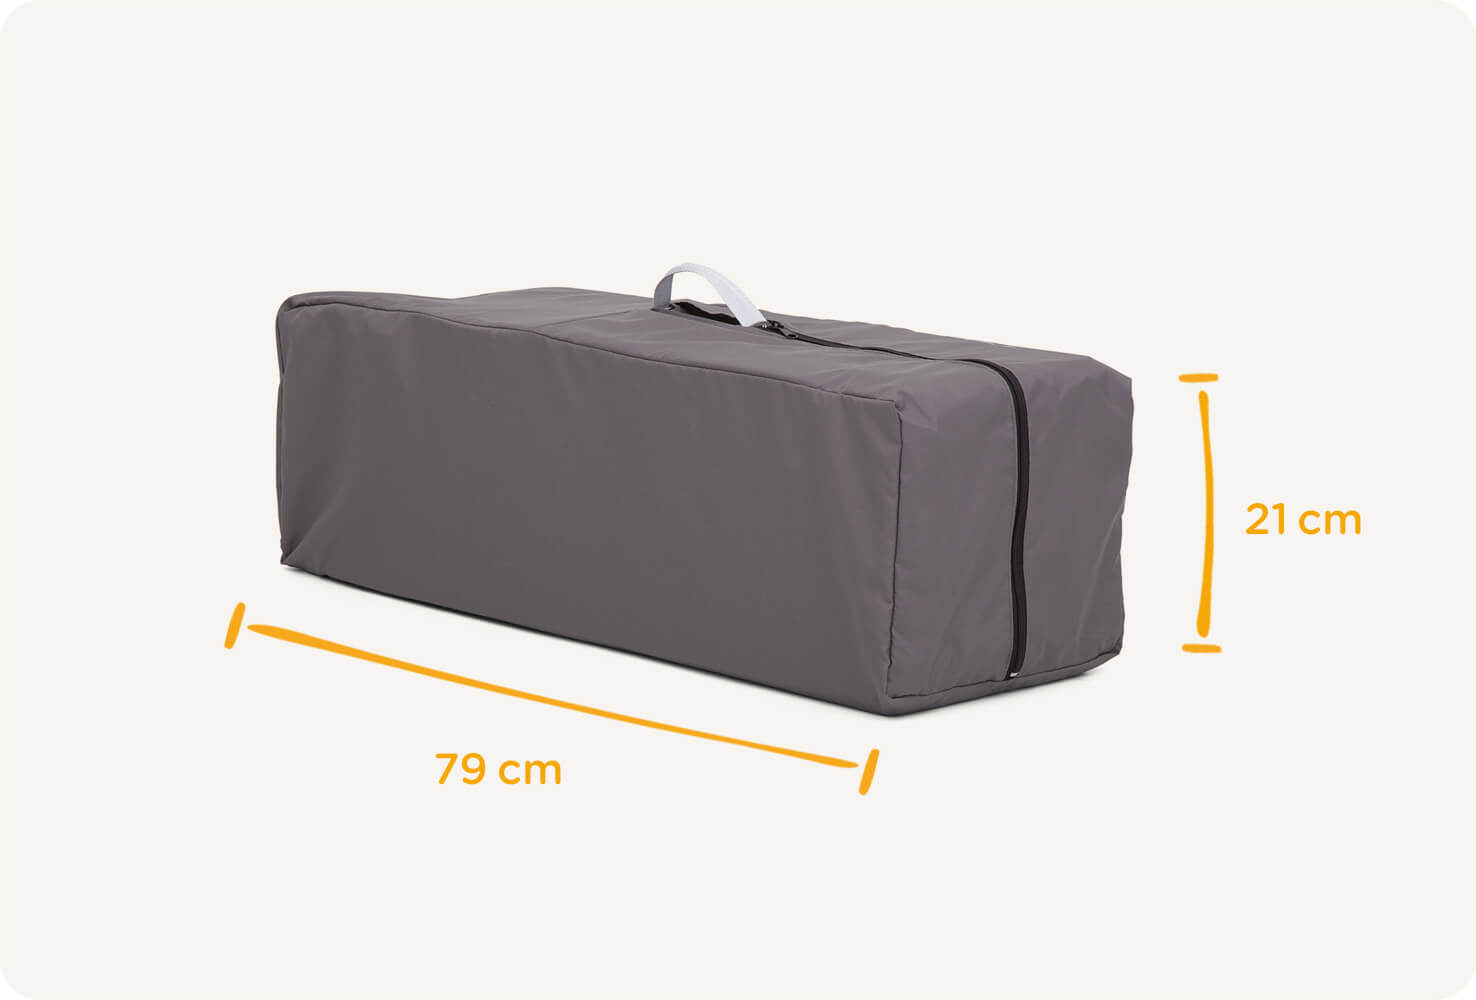  Joie travel cot commuter change & snoozer in grey packed up in travel case with measurement of 79cm height and 25cm width.